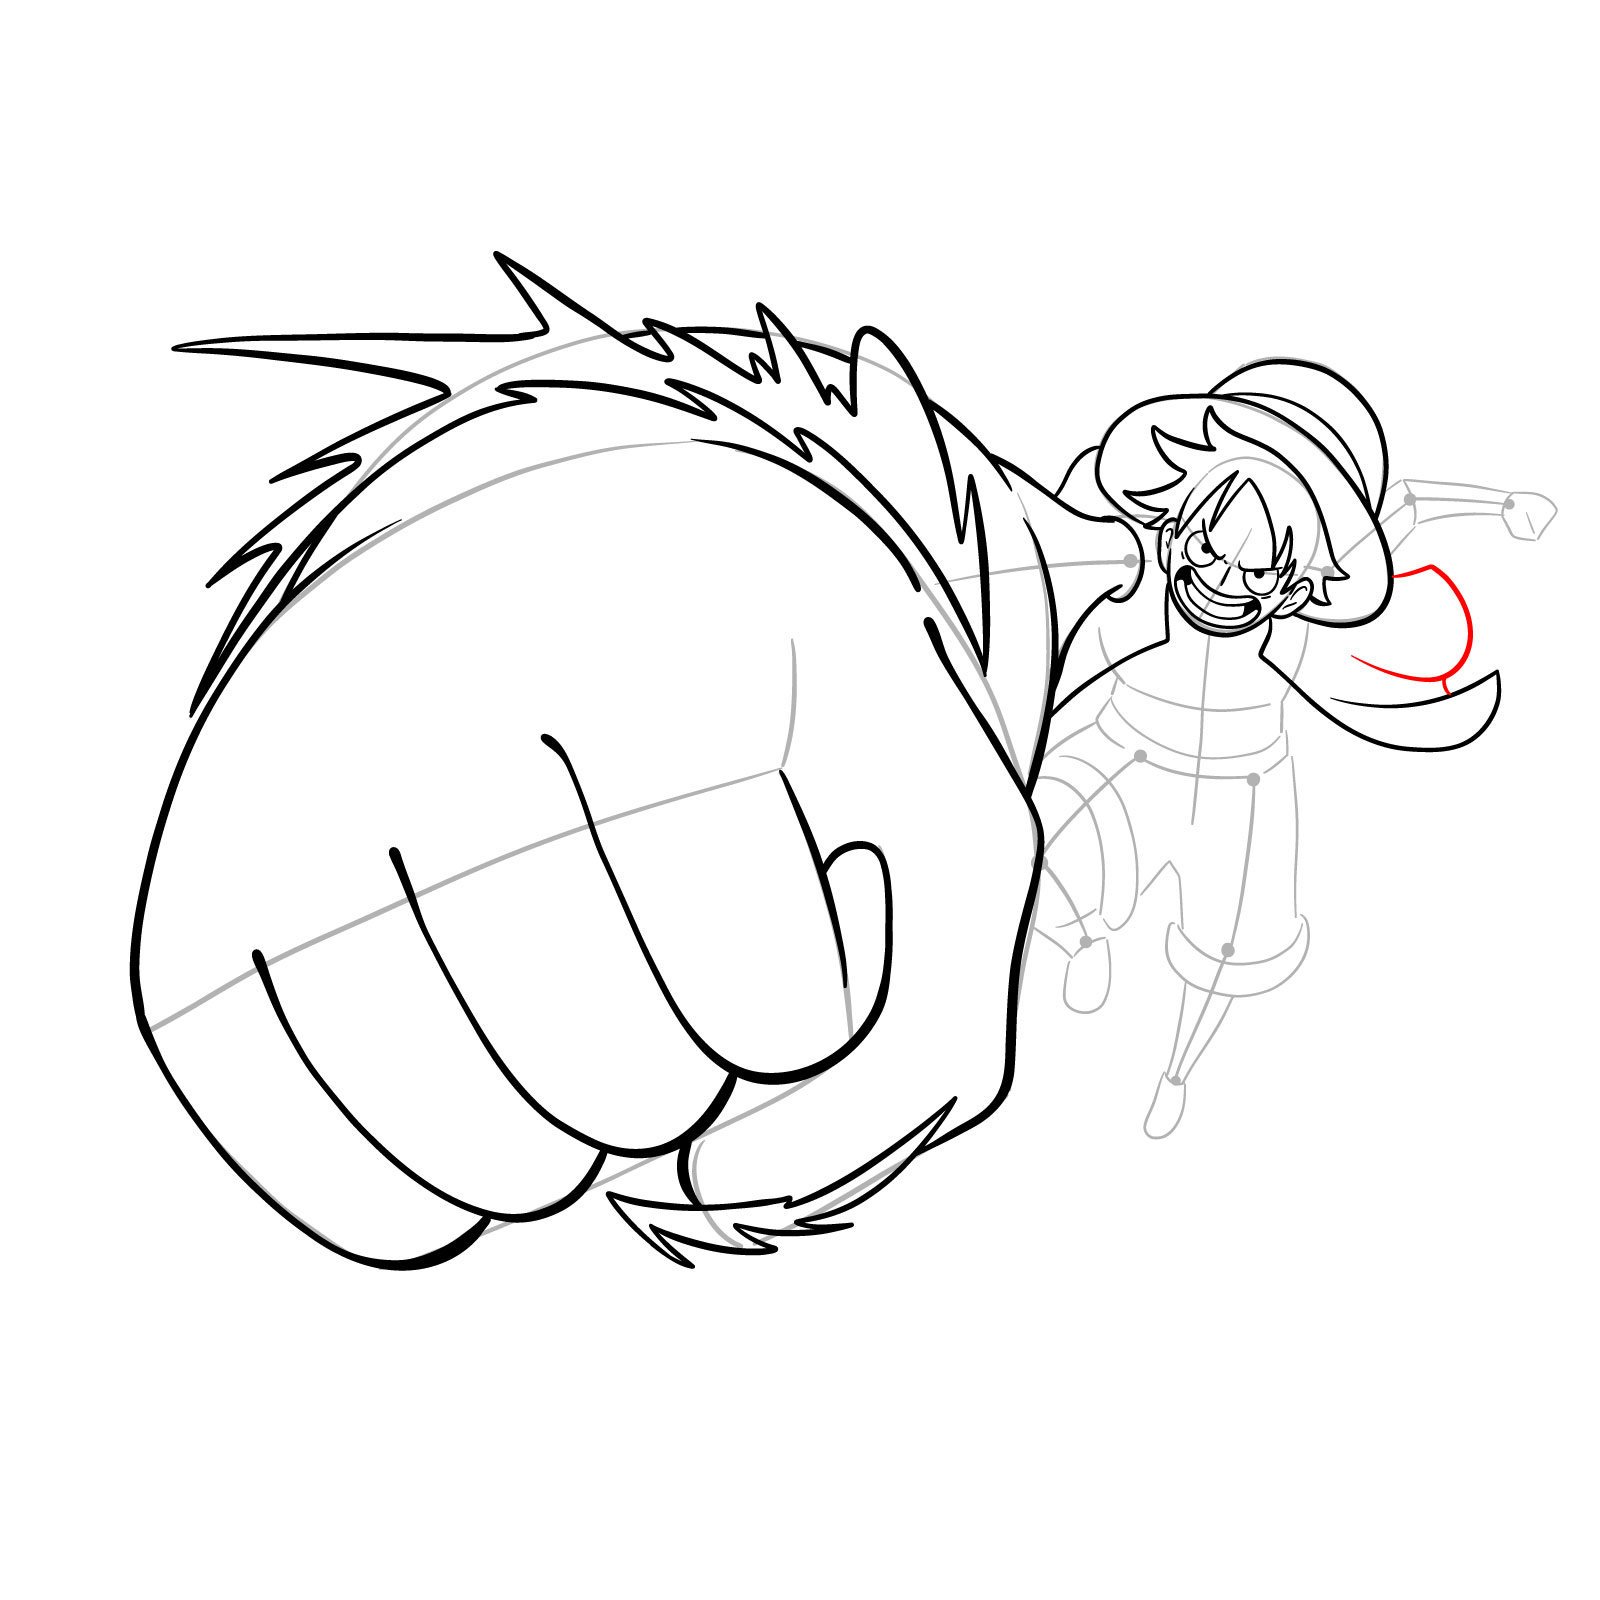 How to draw Luffy's Gear 3 without haki - step 26